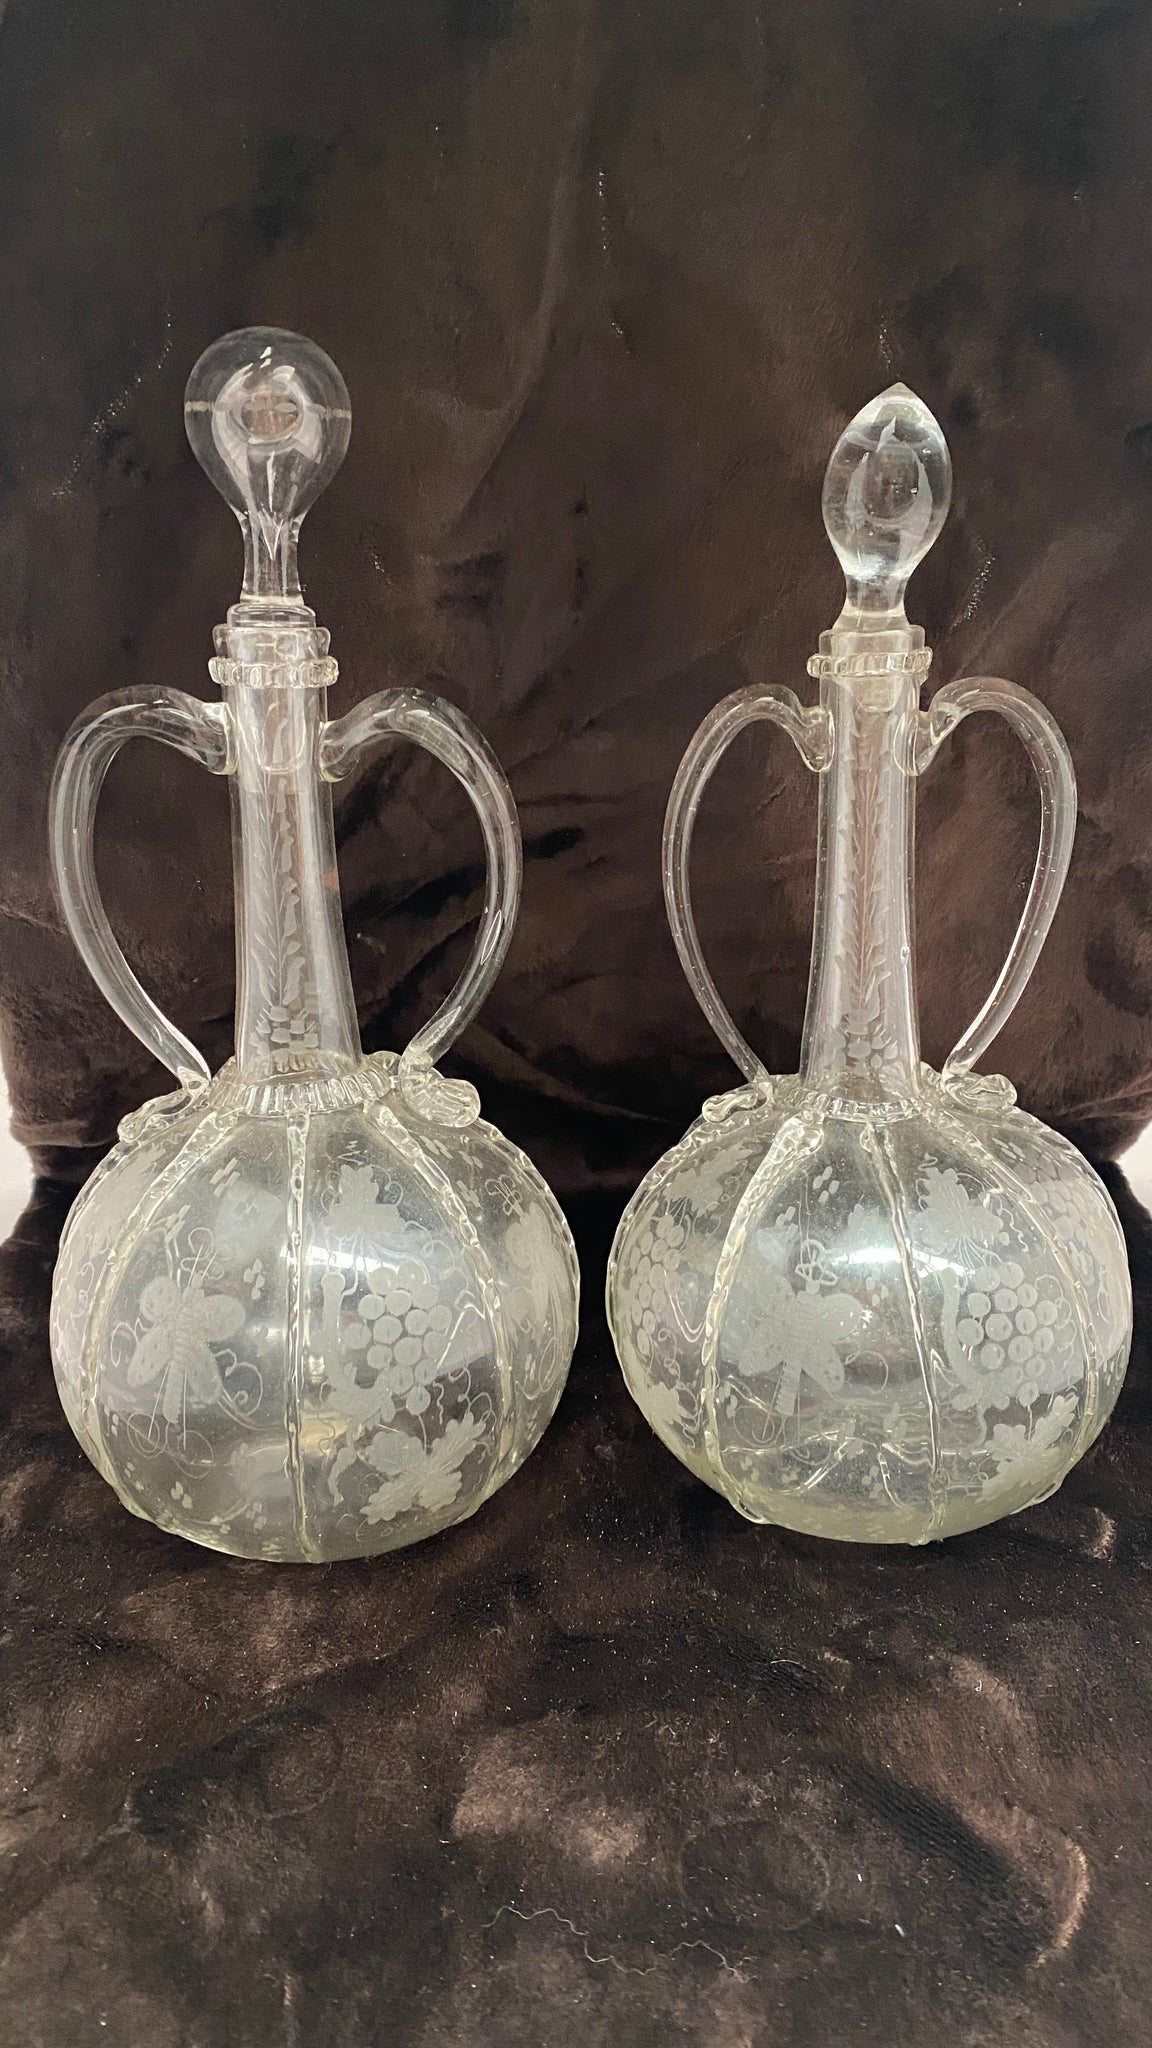 23cm Pair Etched Glass Decanters (1x All faults) c.1800